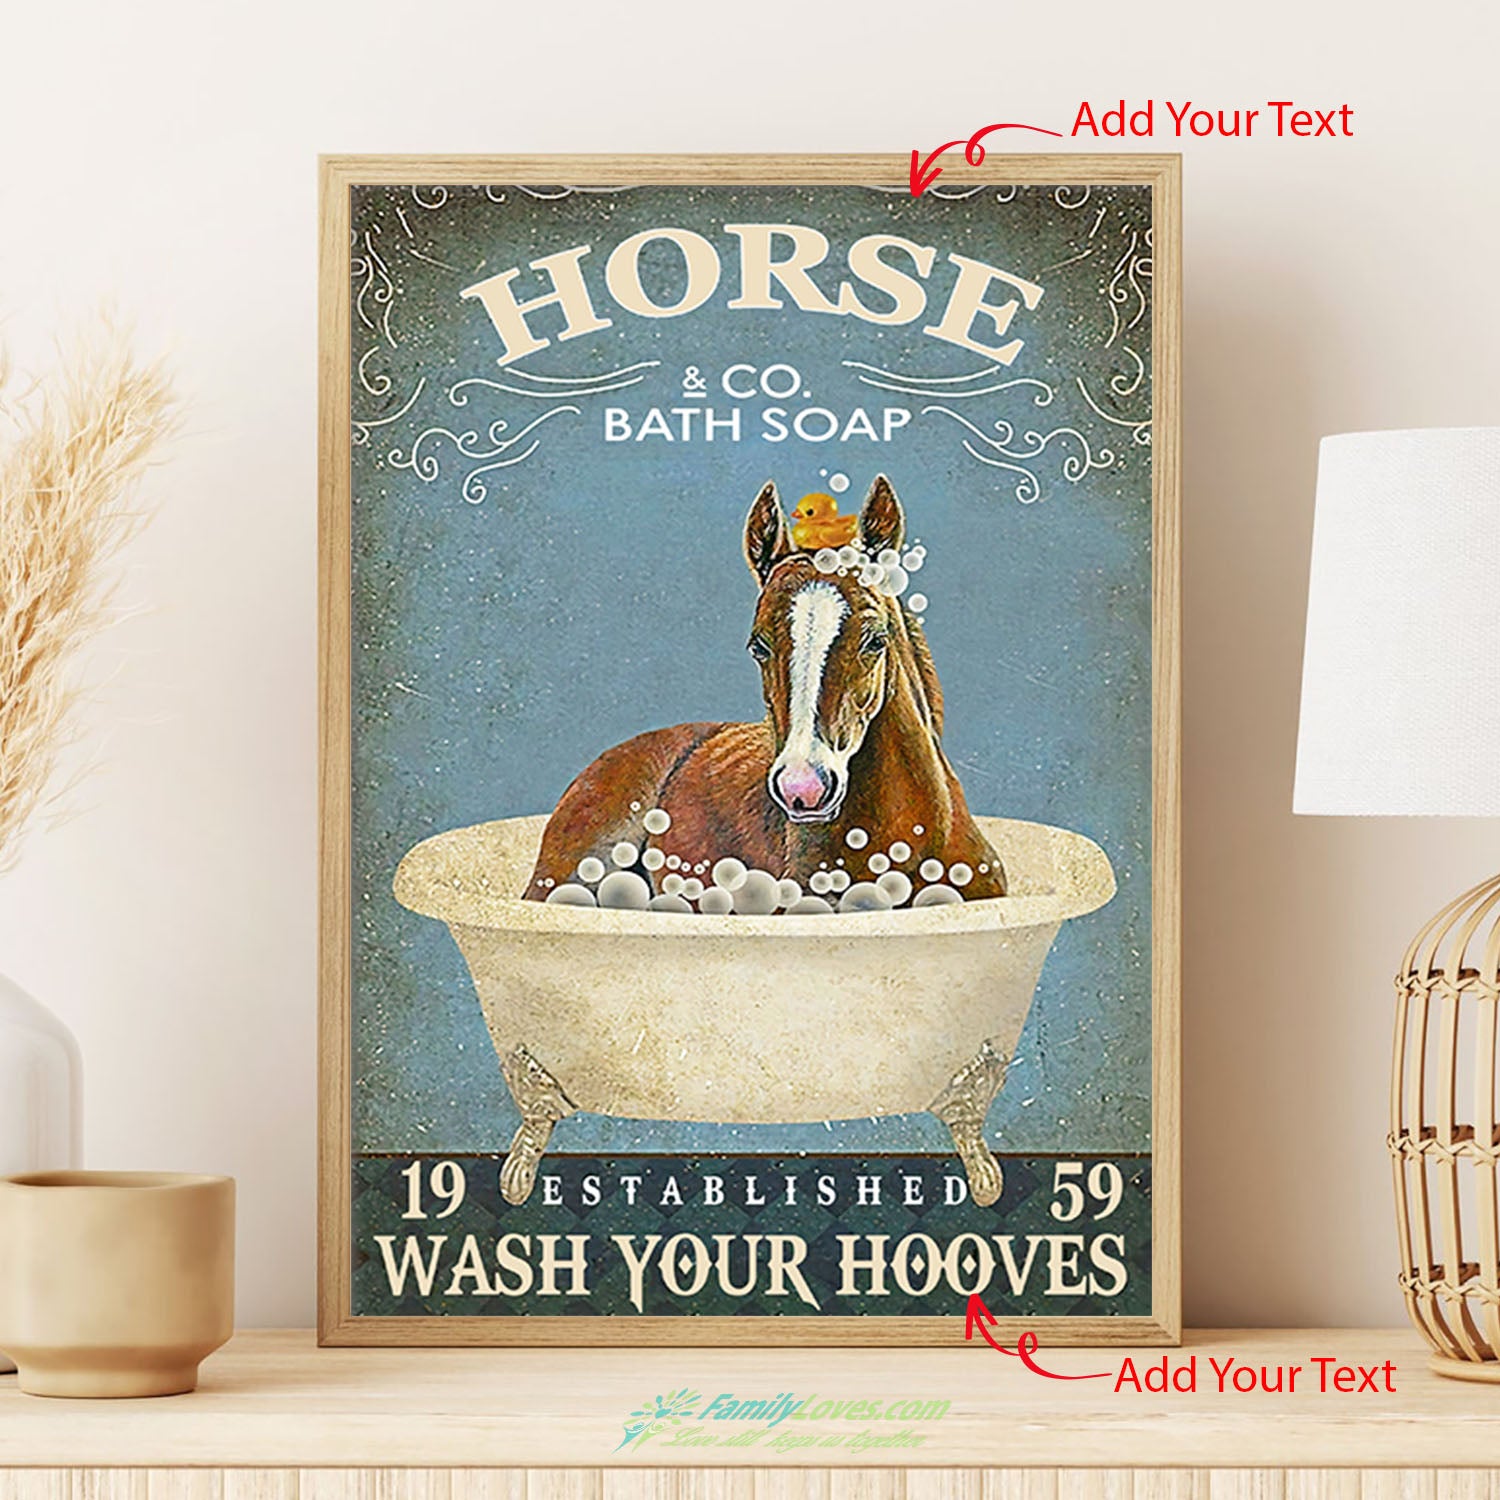 Horse Co Bath Soap Wash Your Hooves Large Canvas Art Poster Printer All Size 1